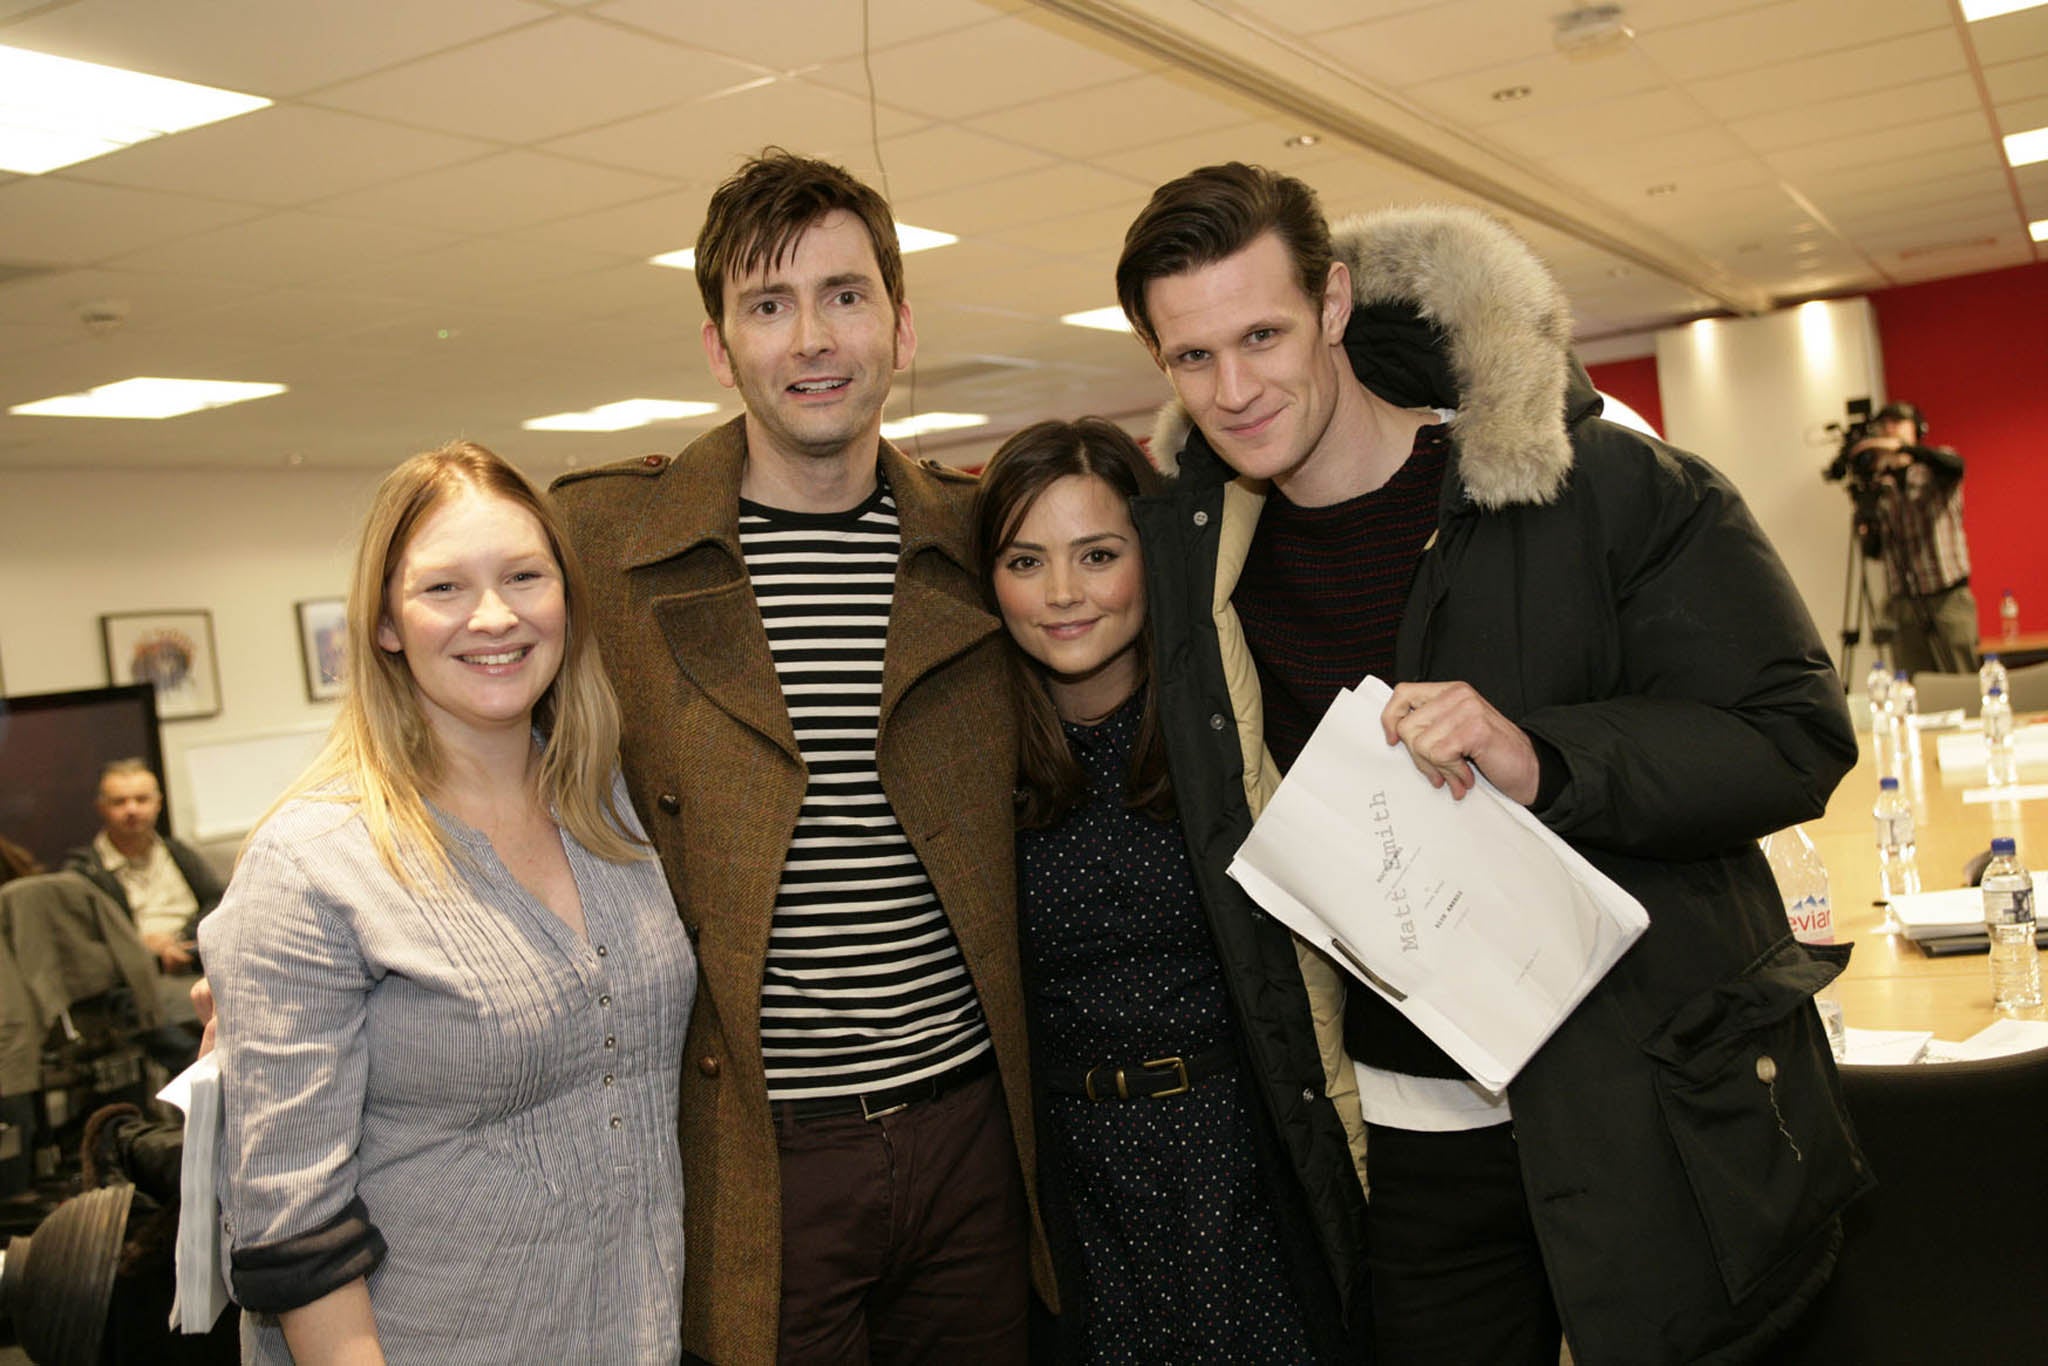 David Tennant and Matt Smith at the read-through for the Doctor Who 50th anniversary